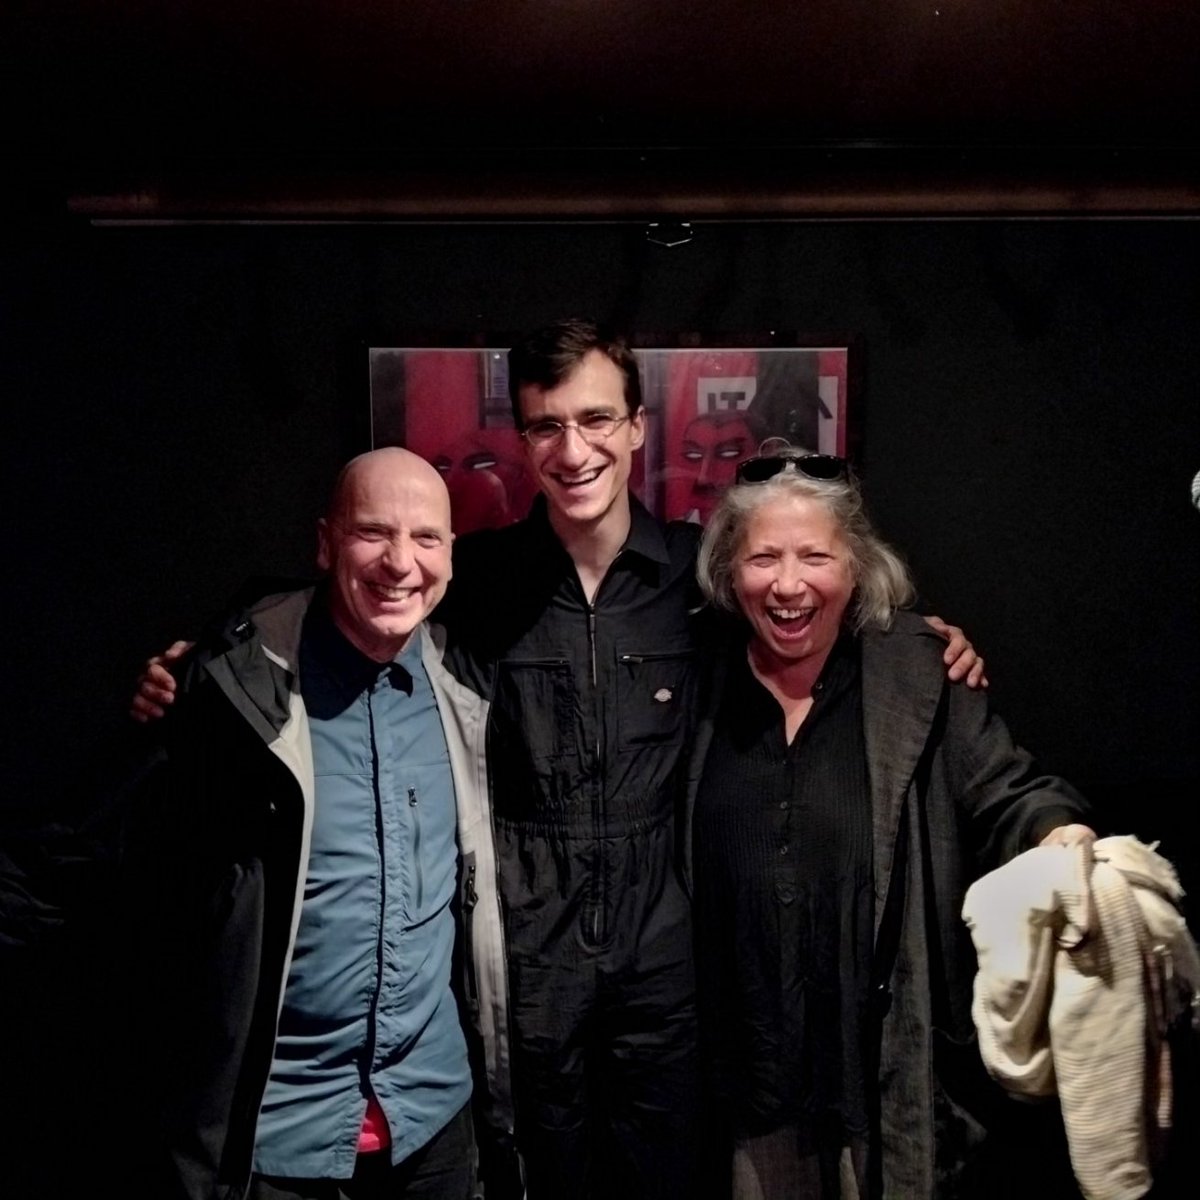 So this happened: Joey Baron & Robyn Schulkowsky came to see my solo show at @knuttelhouse1 in Tokyo yesterday! ♥️🎶 So grateful. 

#joeybaron #robynschulkowsky #jazzroyalty #solo #soloconcert #loop #livelooping #live #concert #jazz #vocaljazz #jazzsinger #jazzvocalist #tokyo